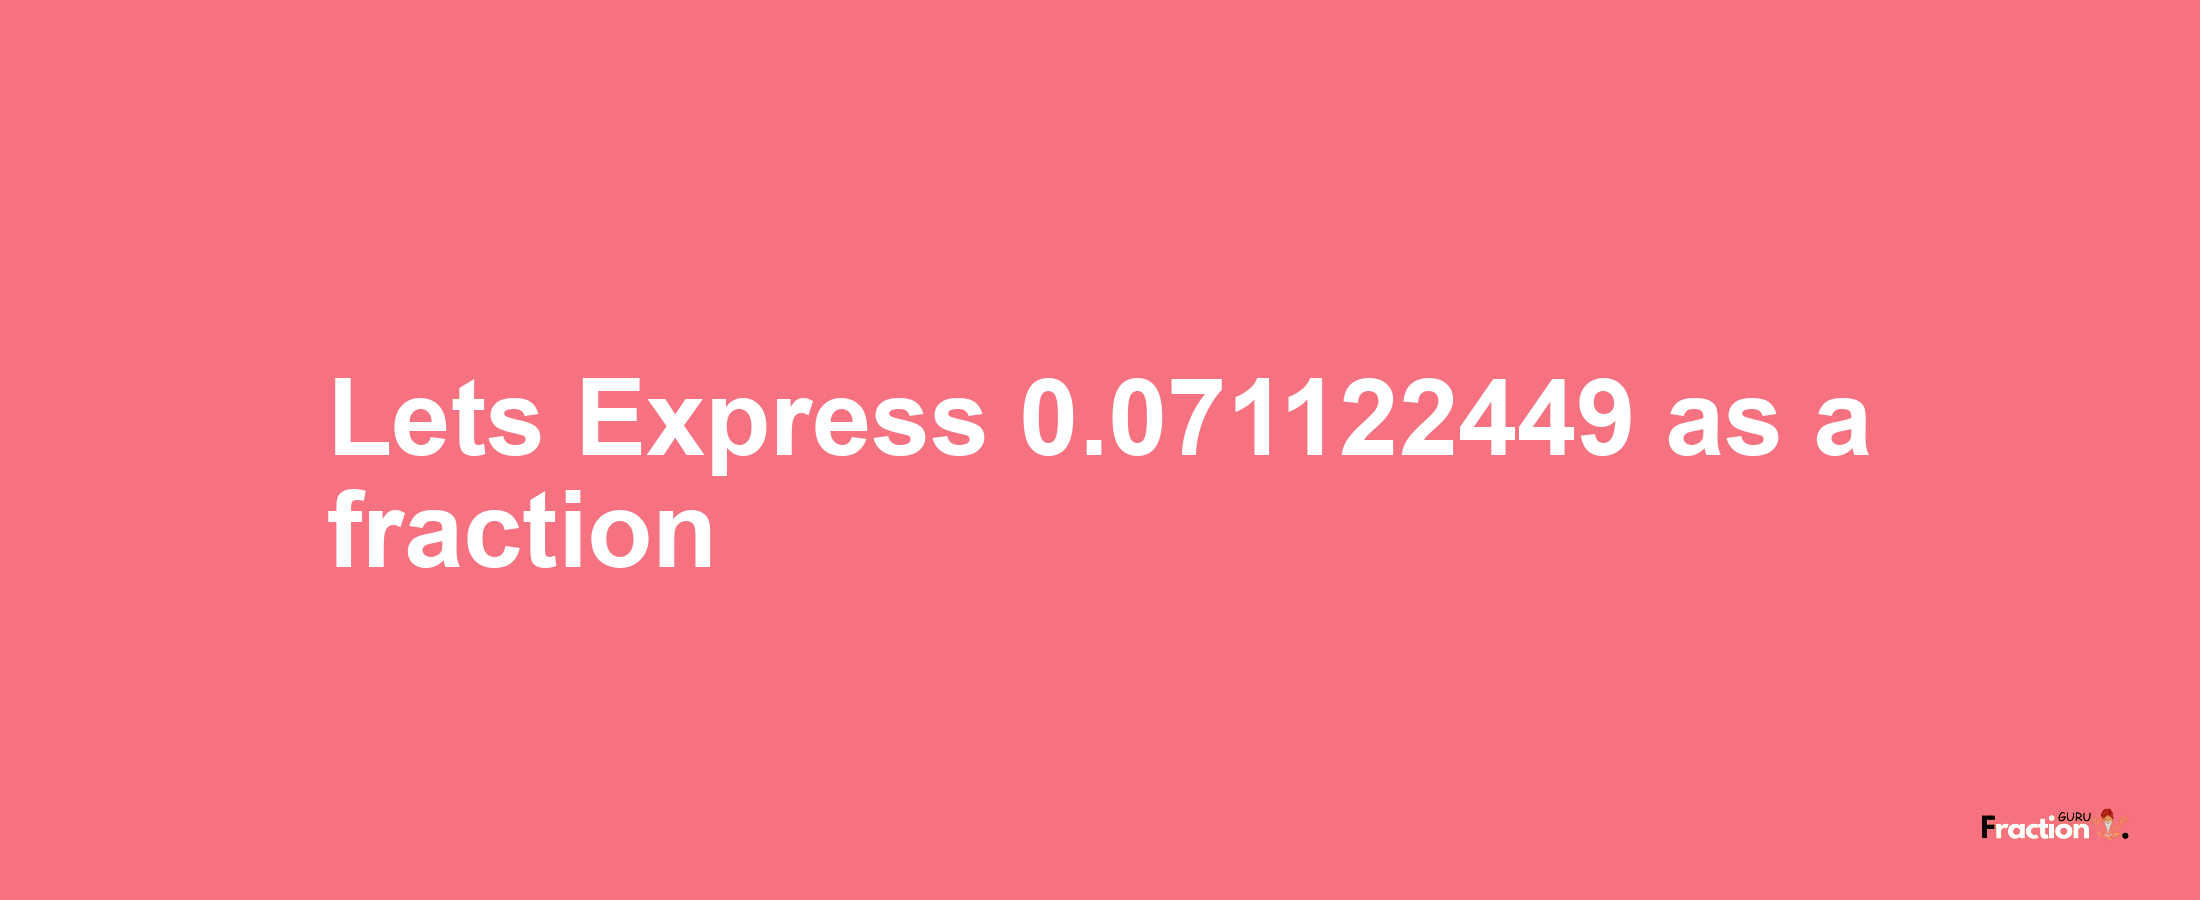 Lets Express 0.071122449 as afraction